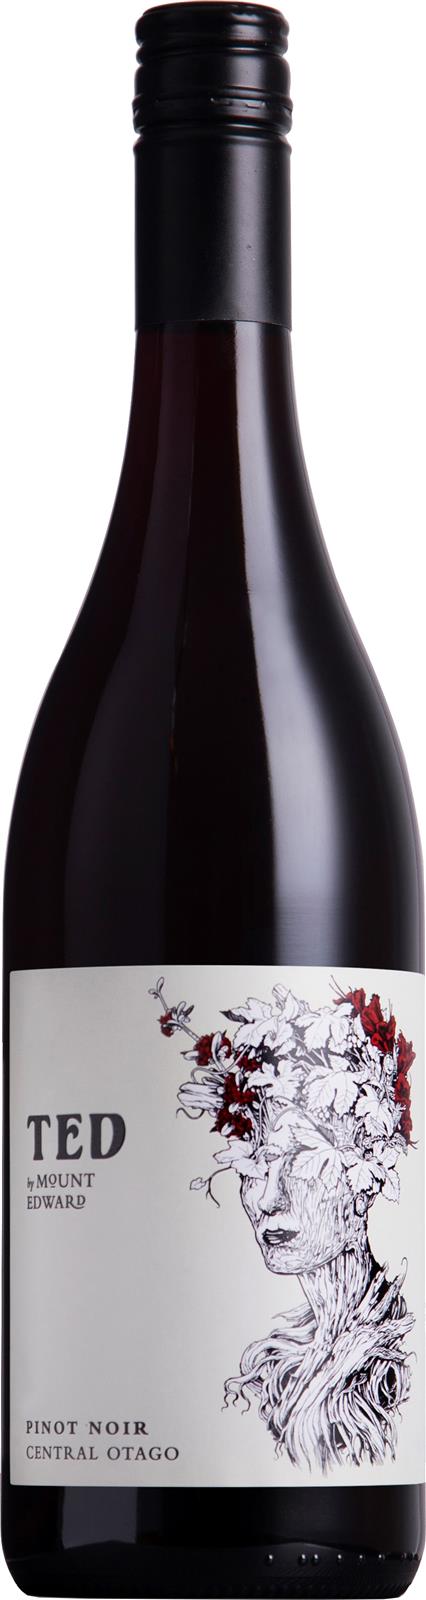 Ted by Mount Edward Central Otago Pinot Noir 2017